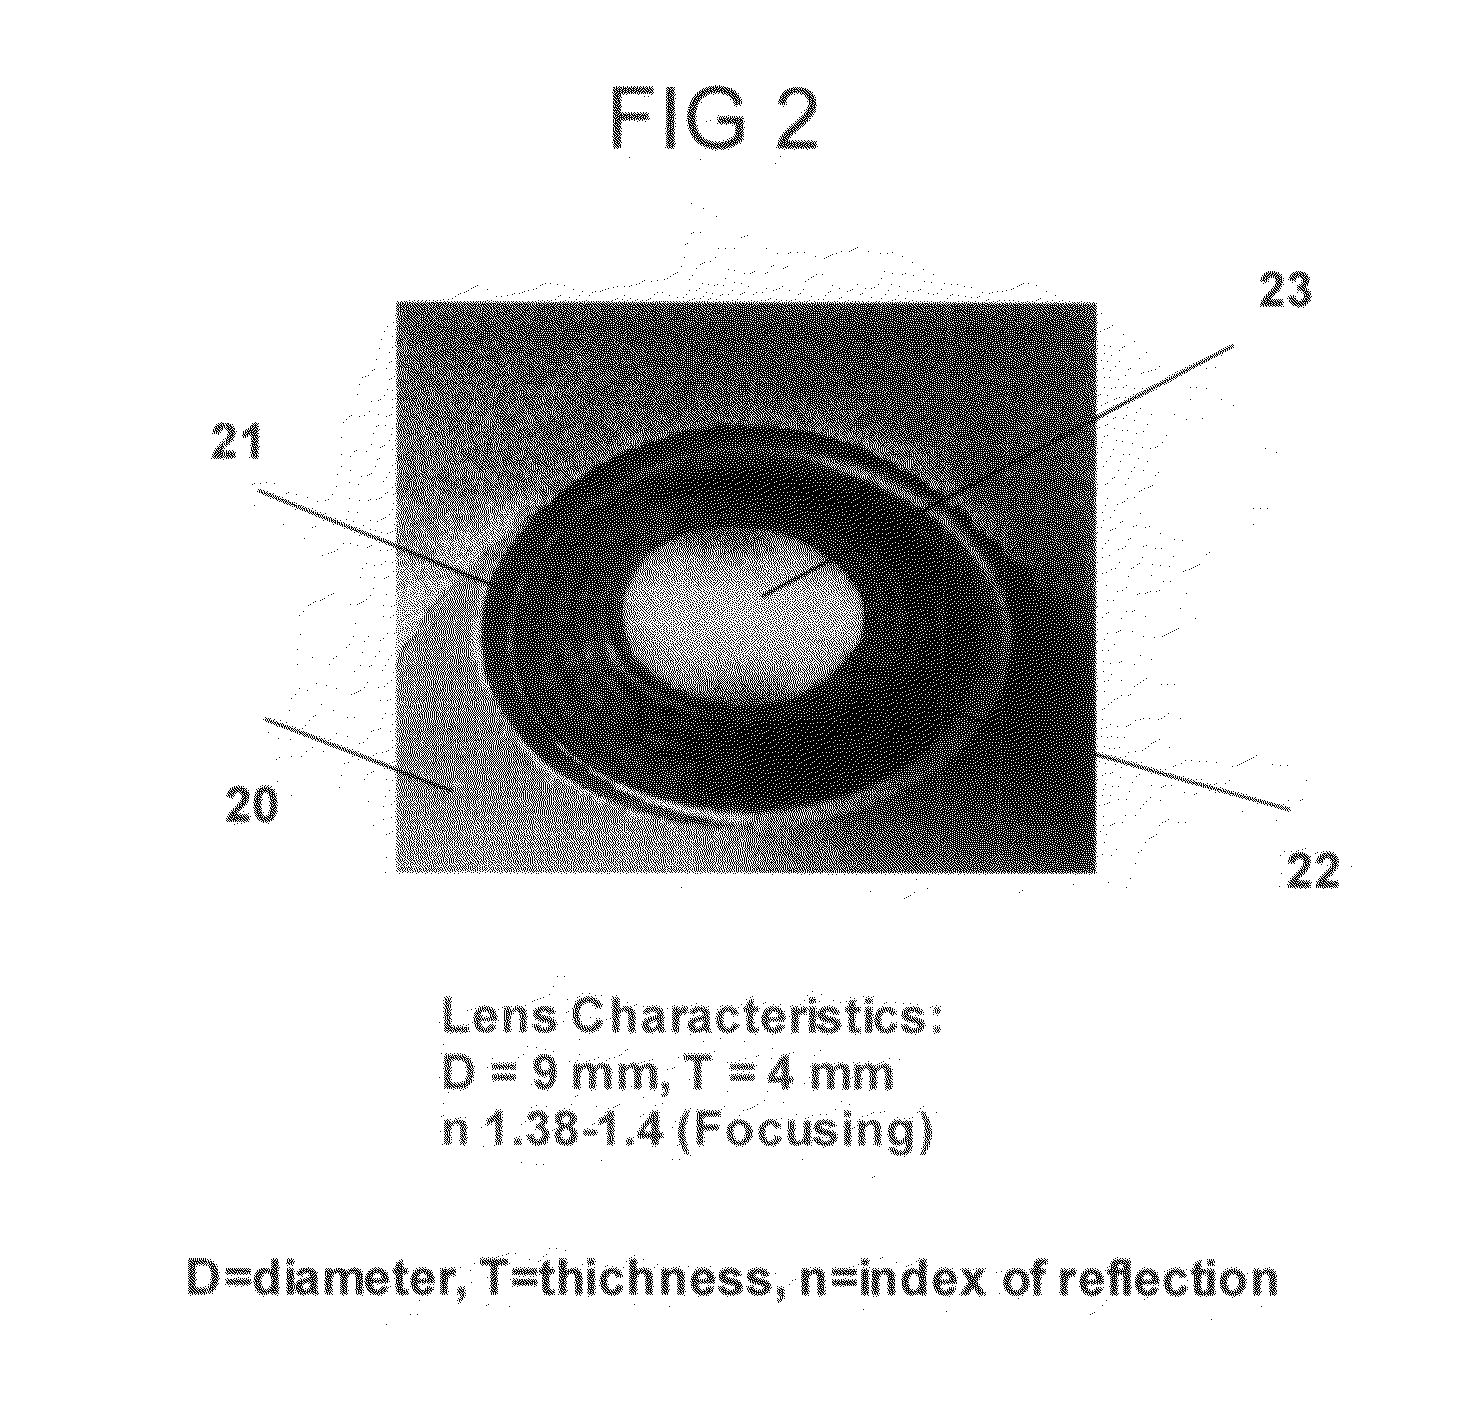 Method and apparatus for early diagnosis of Alzheimer's using non-invasive eye tomography by Terahertz